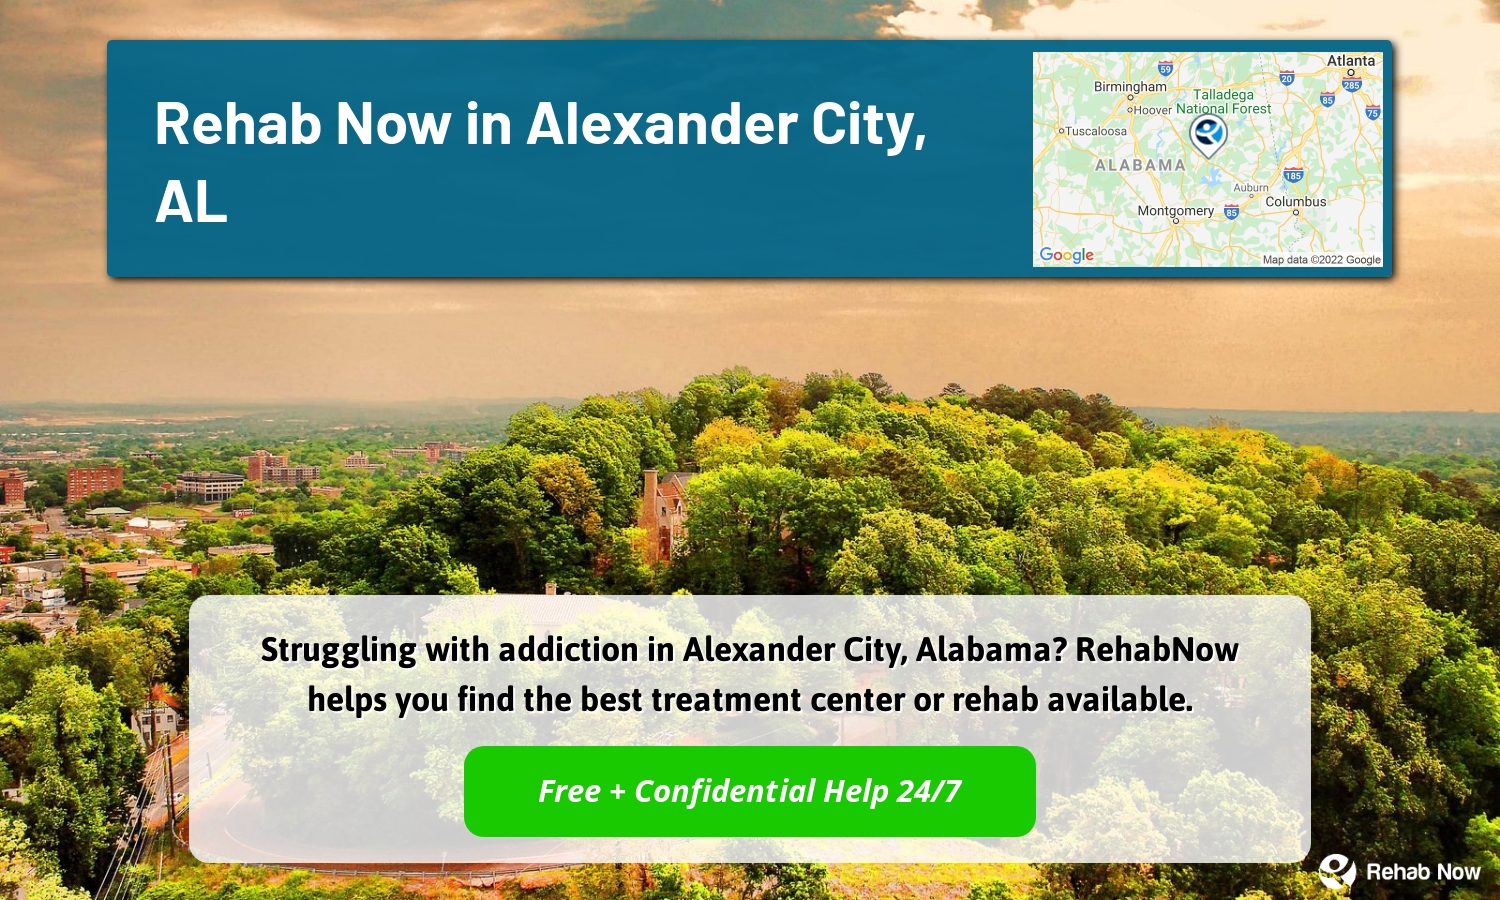 Struggling with addiction in Alexander City, Alabama? RehabNow helps you find the best treatment center or rehab available.